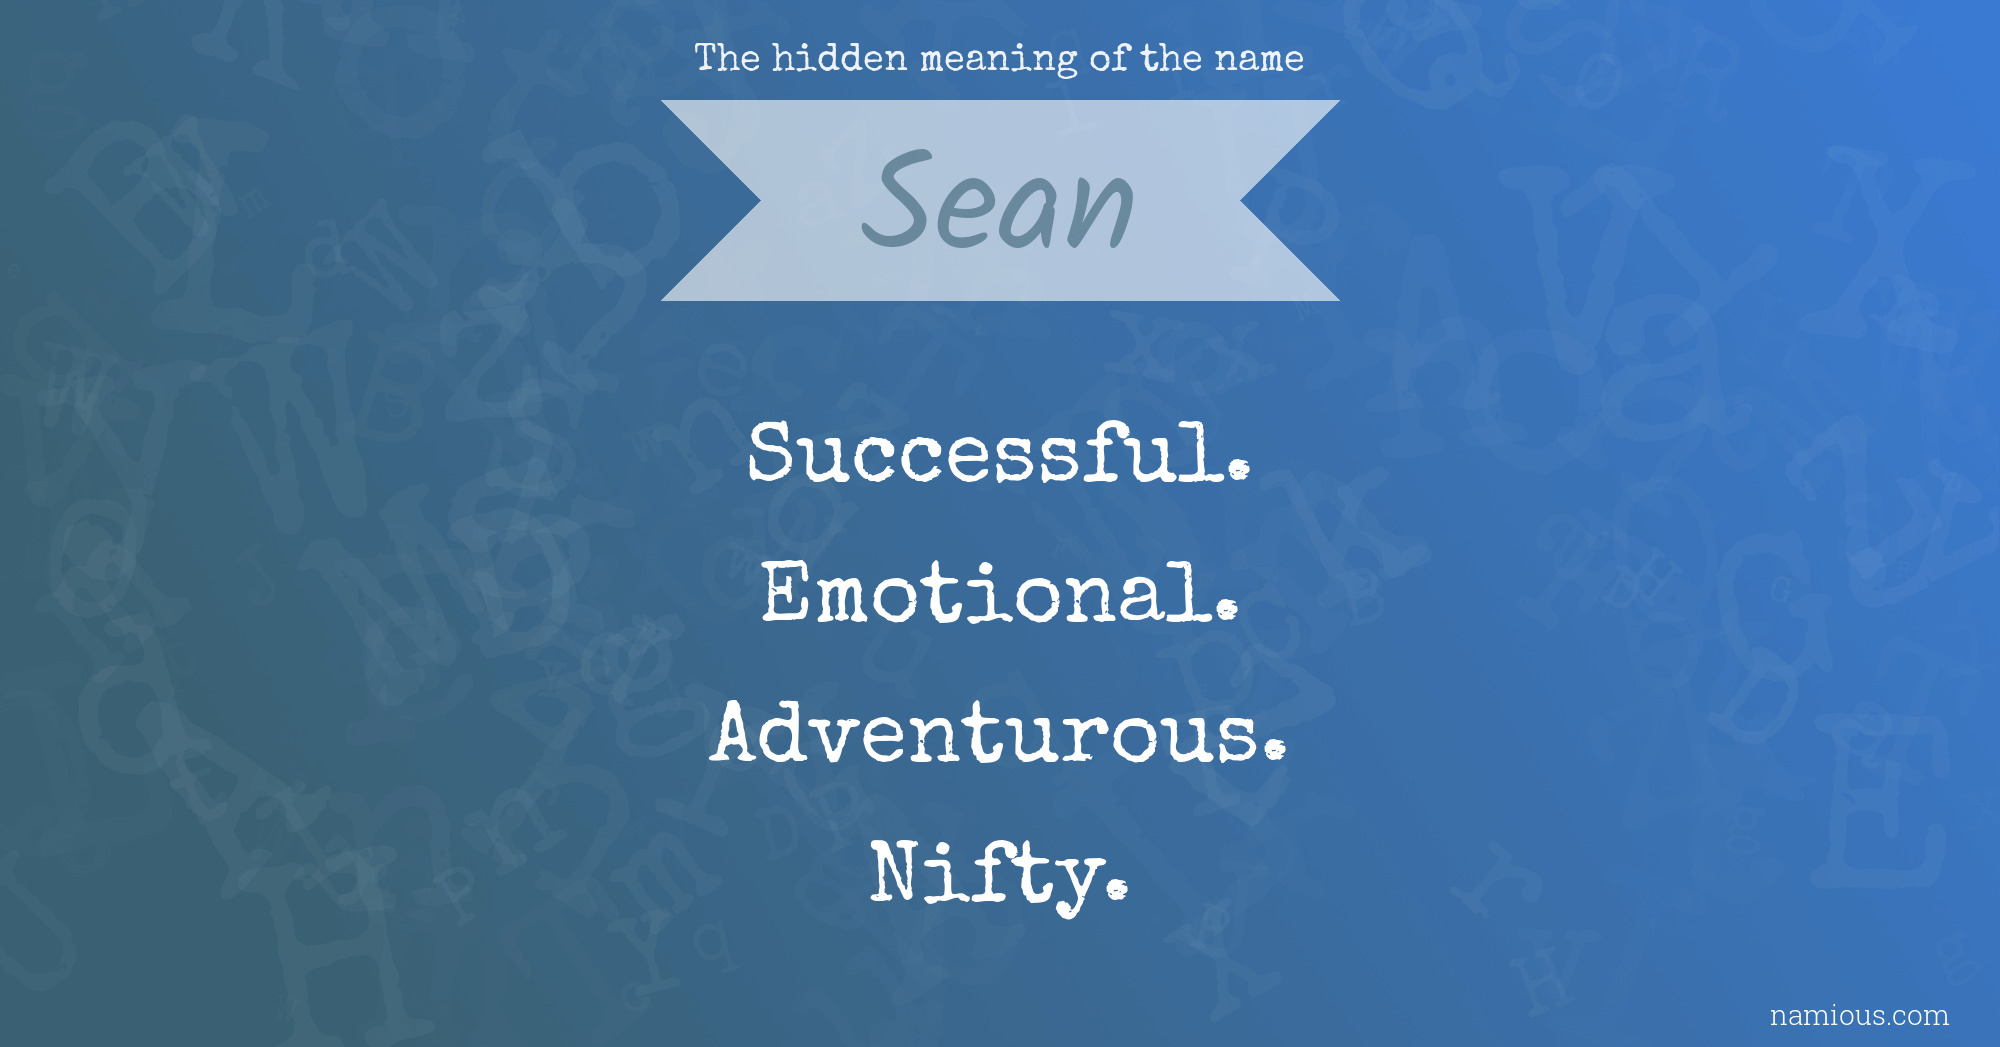 The hidden meaning of the name Sean